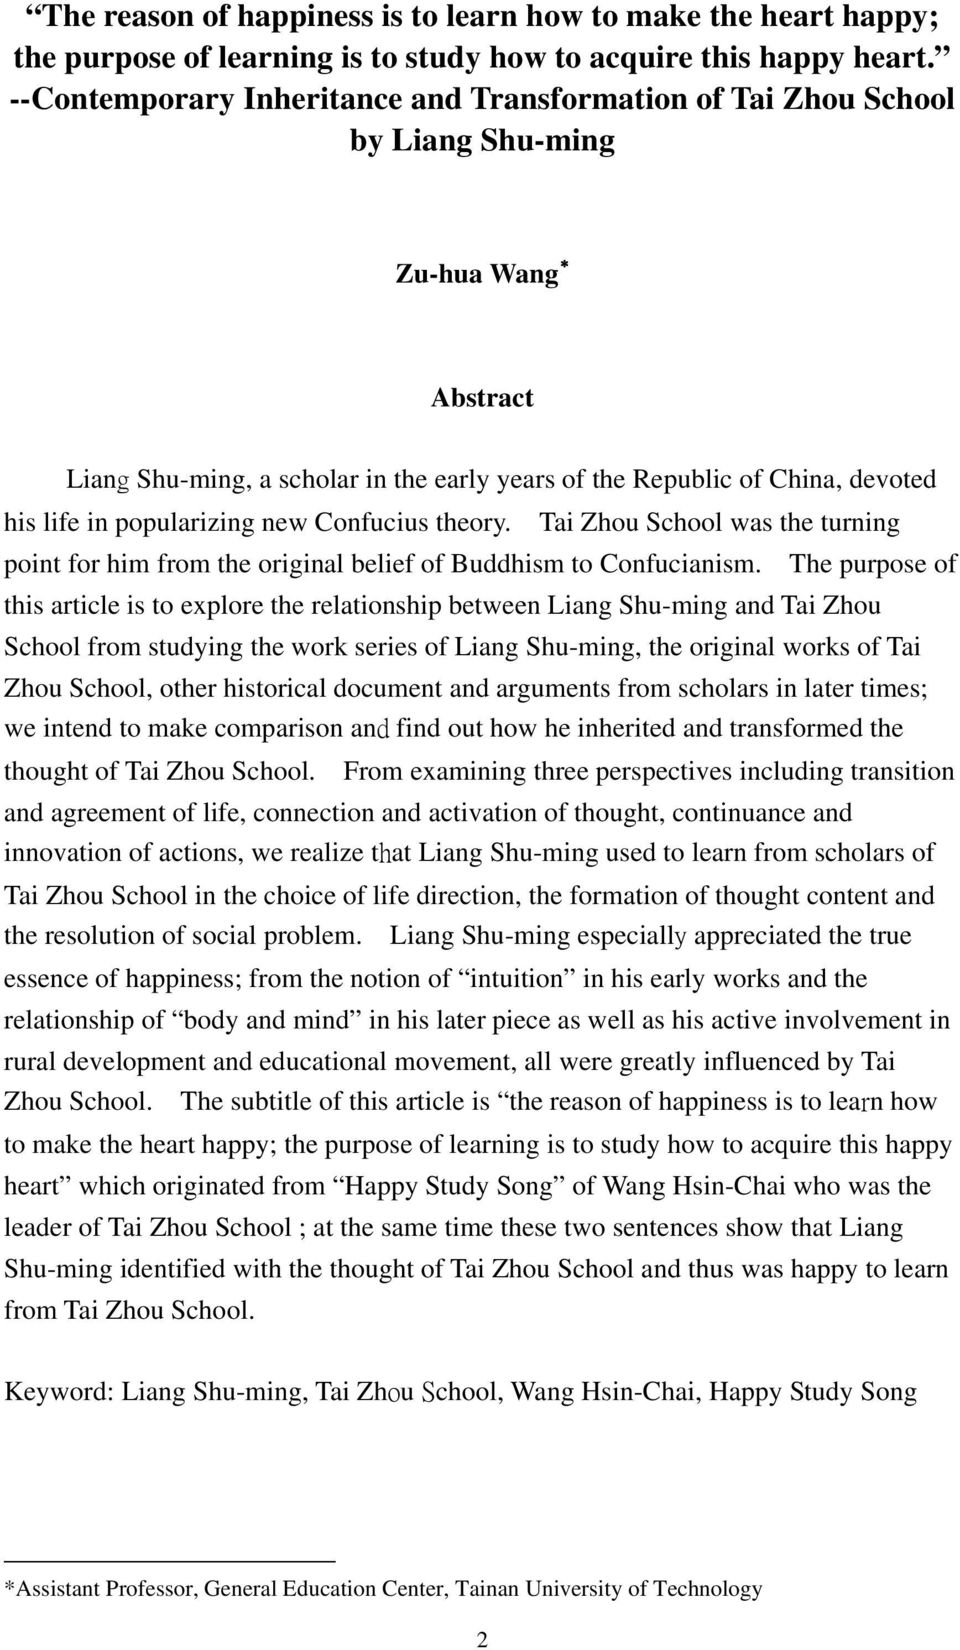 popularizing new Confucius theory. Tai Zhou School was the turning point for him from the original belief of Buddhism to Confucianism.